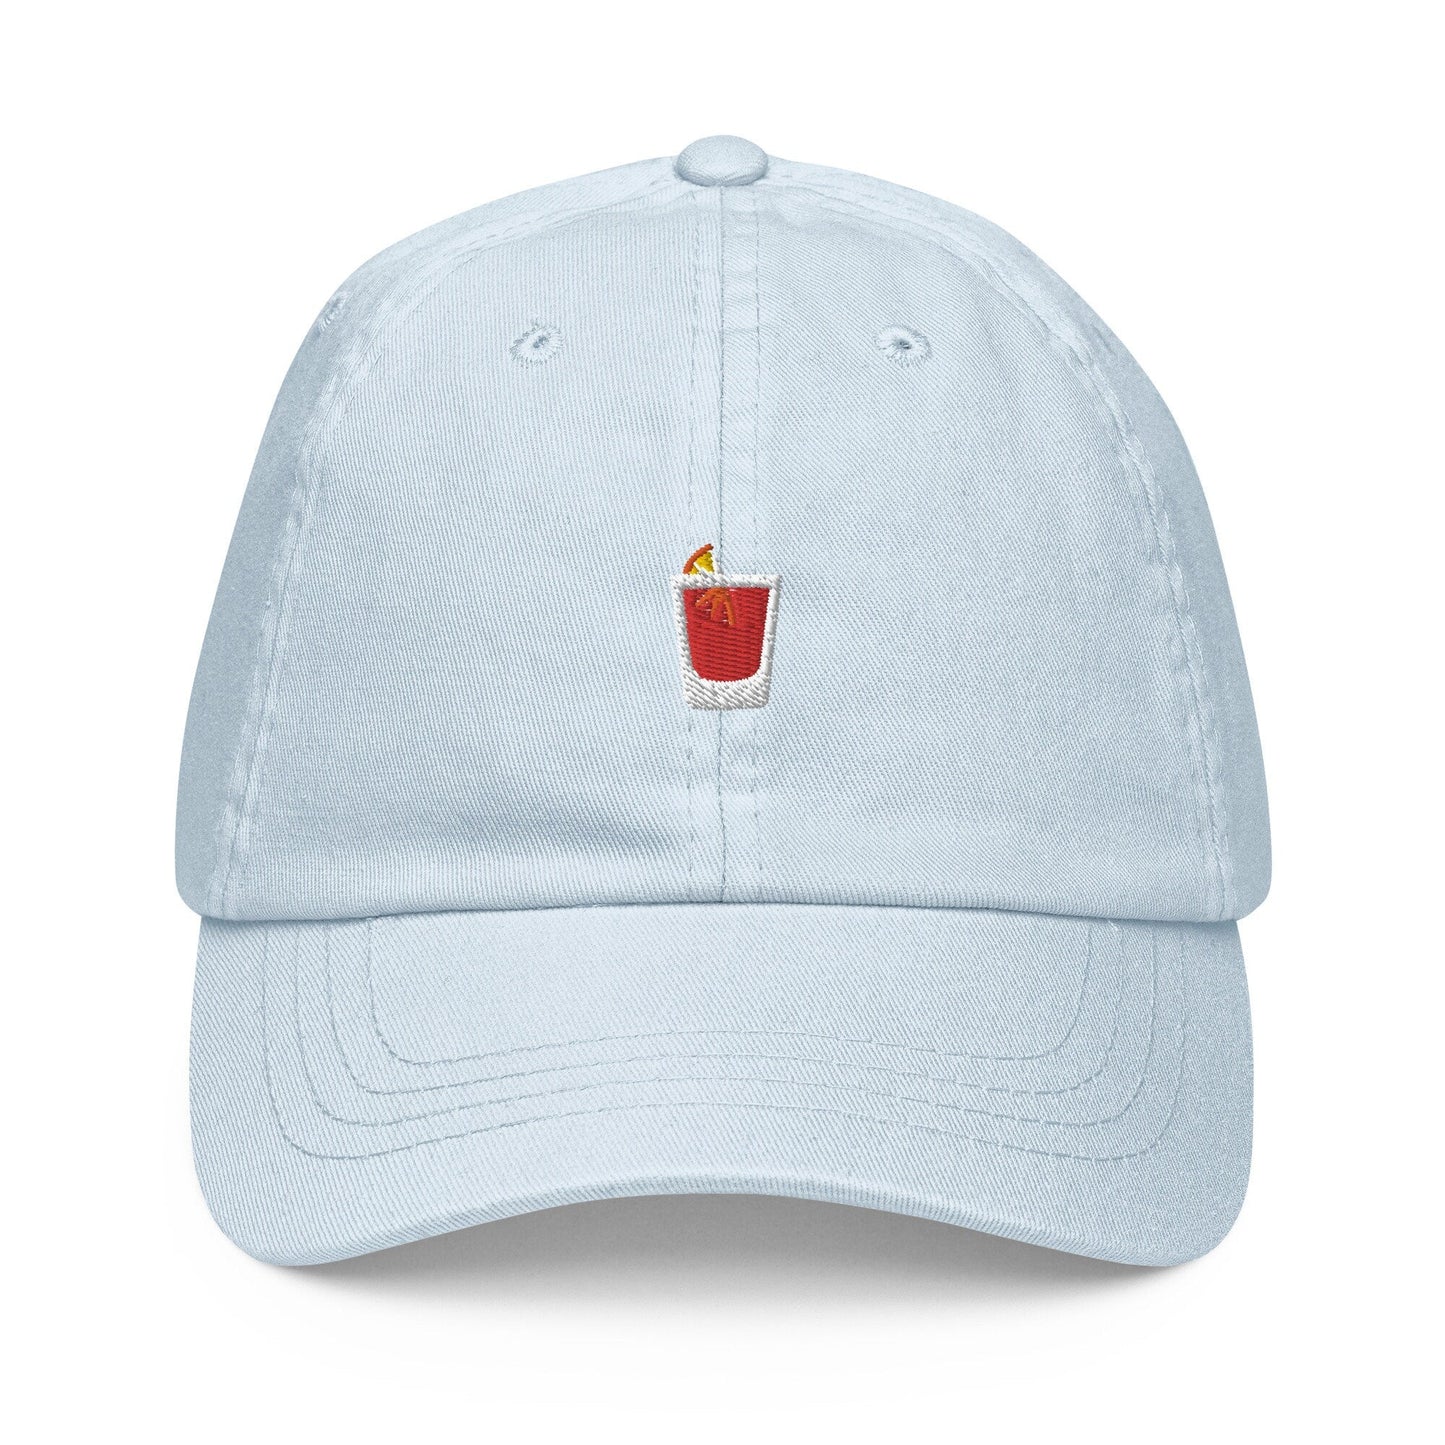 Negroni Pastel Dad Hat - Gift for cocktail lovers - Embroidered Cotton Cap